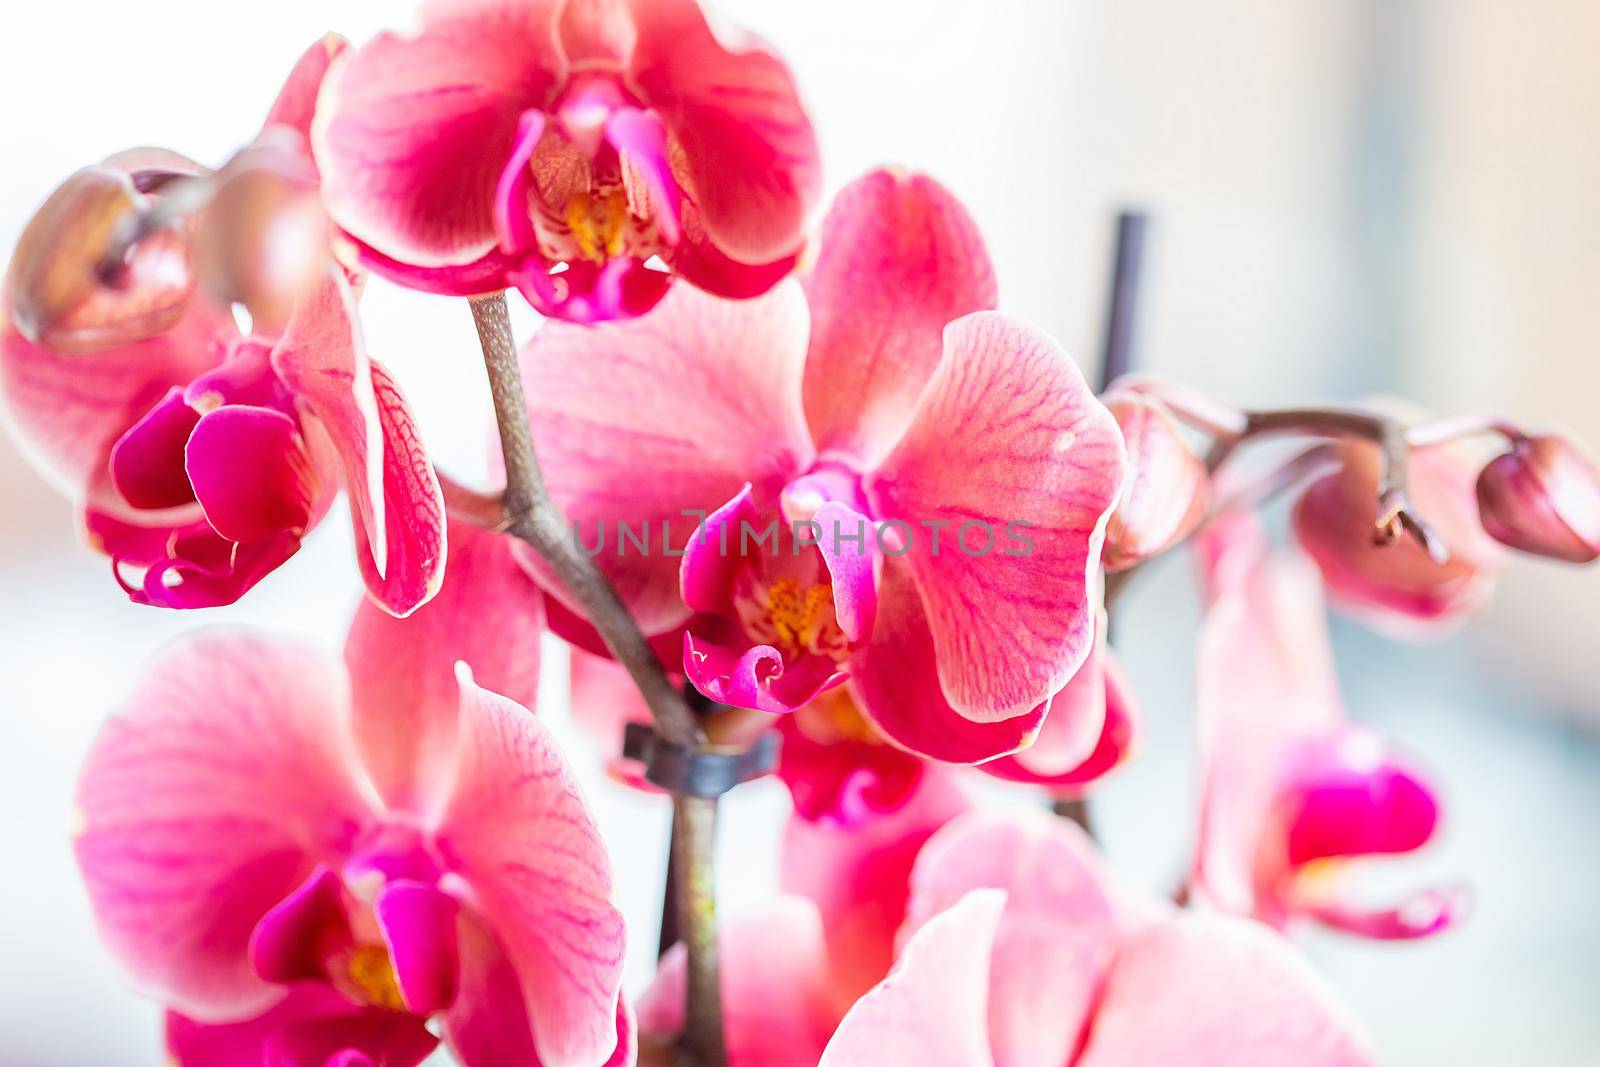 Pink Phalaenopsis orchid flowers are photographed in front of a window by galinasharapova